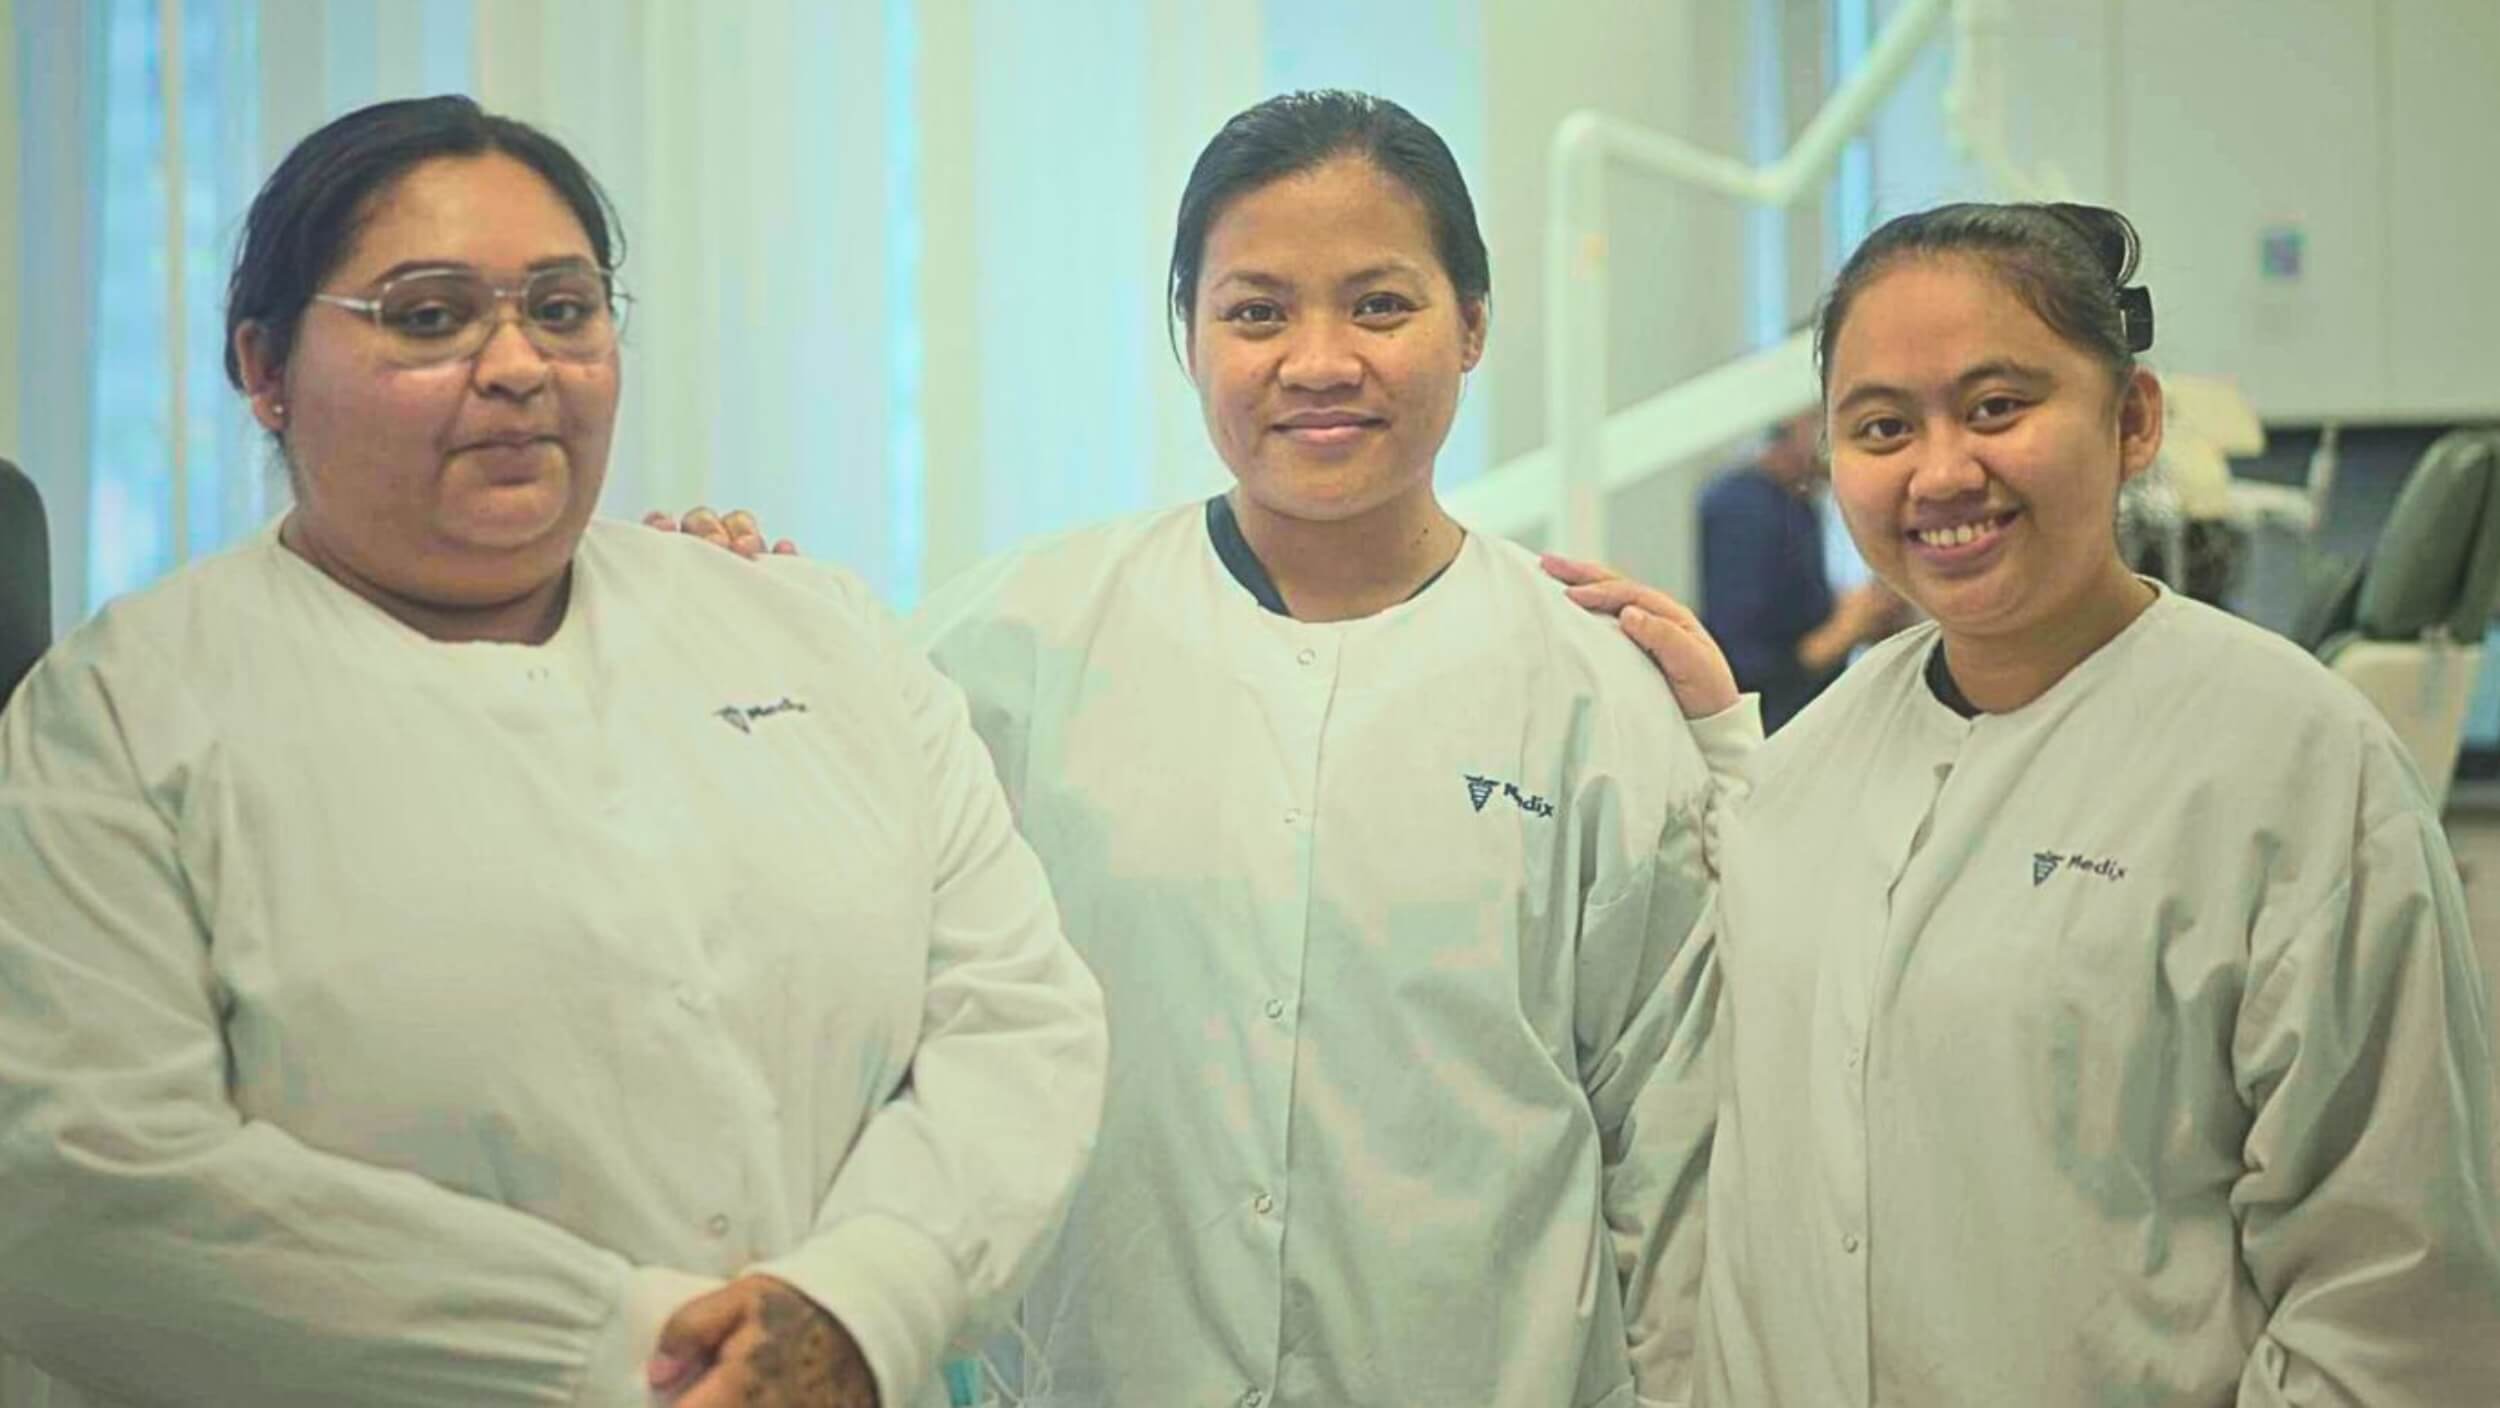 A trio of students completing a dental assistant program in Toronto posing together